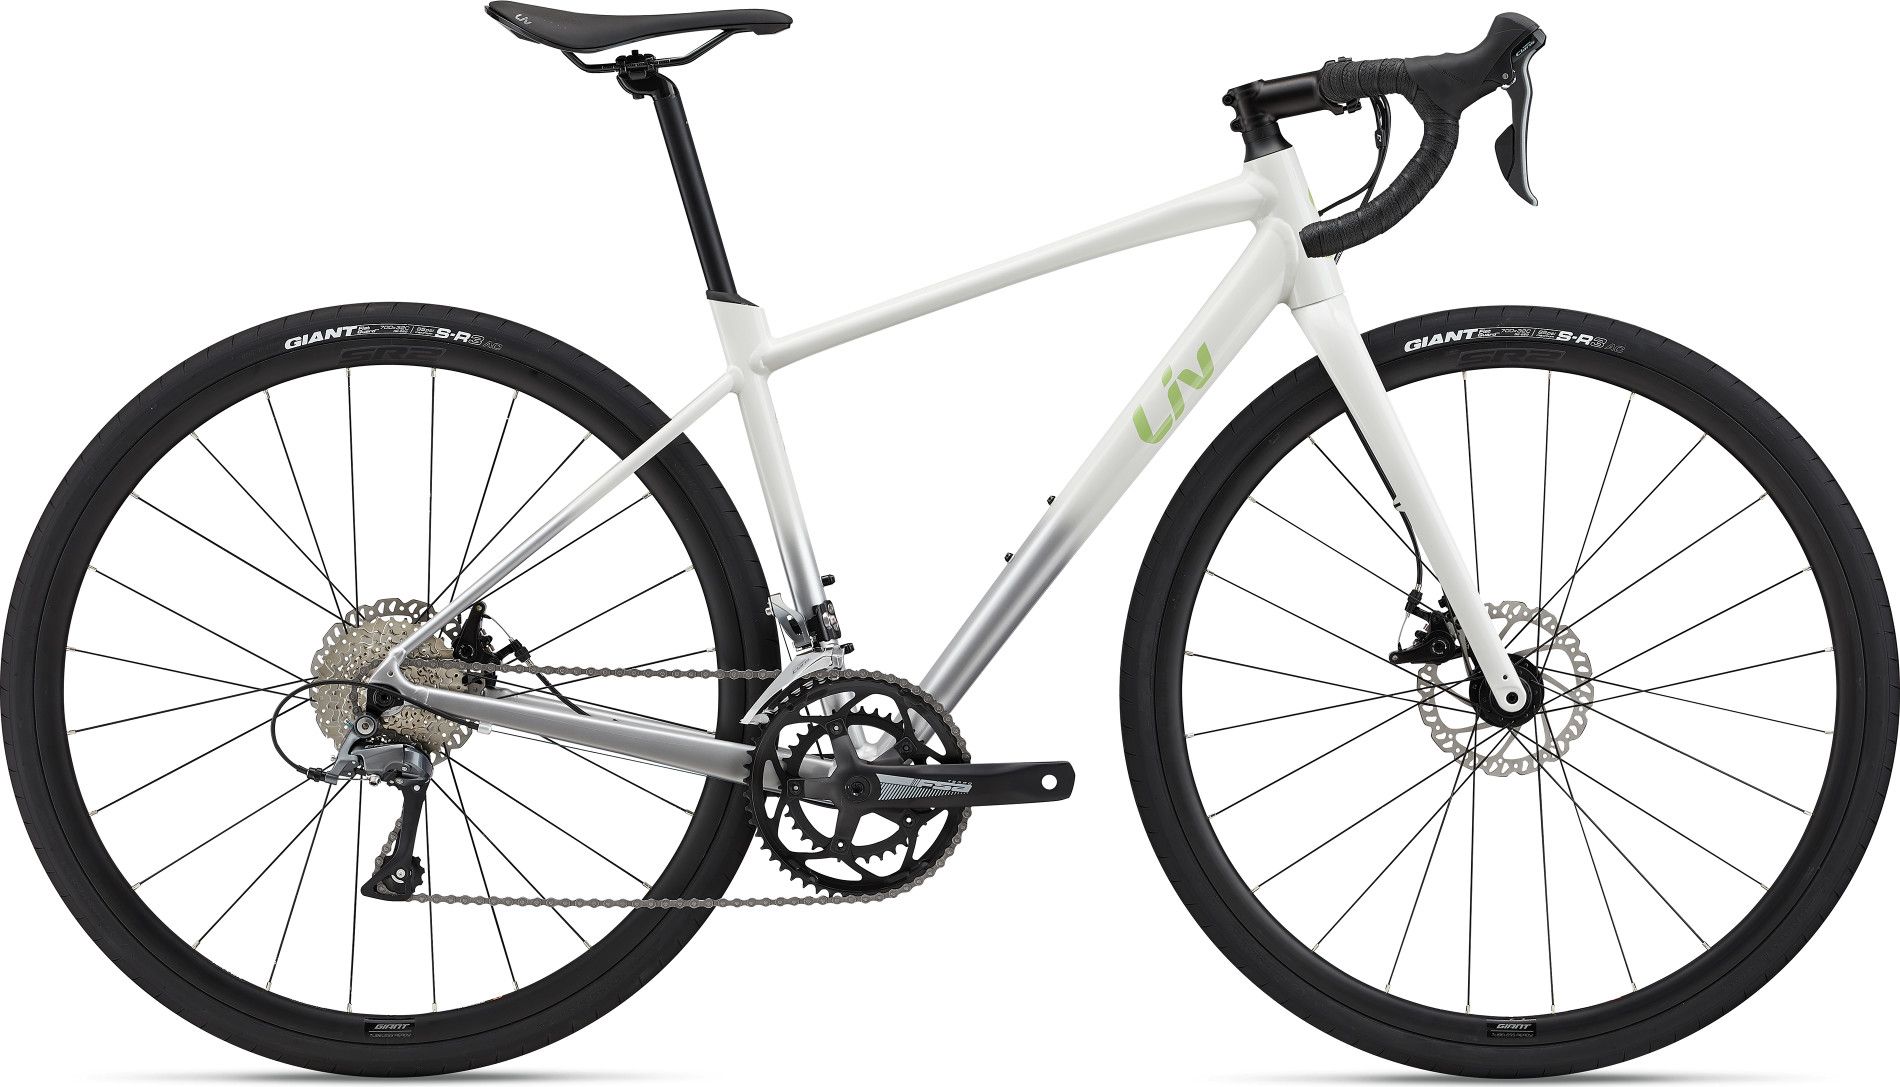 Giant Liv Avail Ar 4 Womens Road Bike £874 Giant Womens Specific Road Bikes Cyclestore